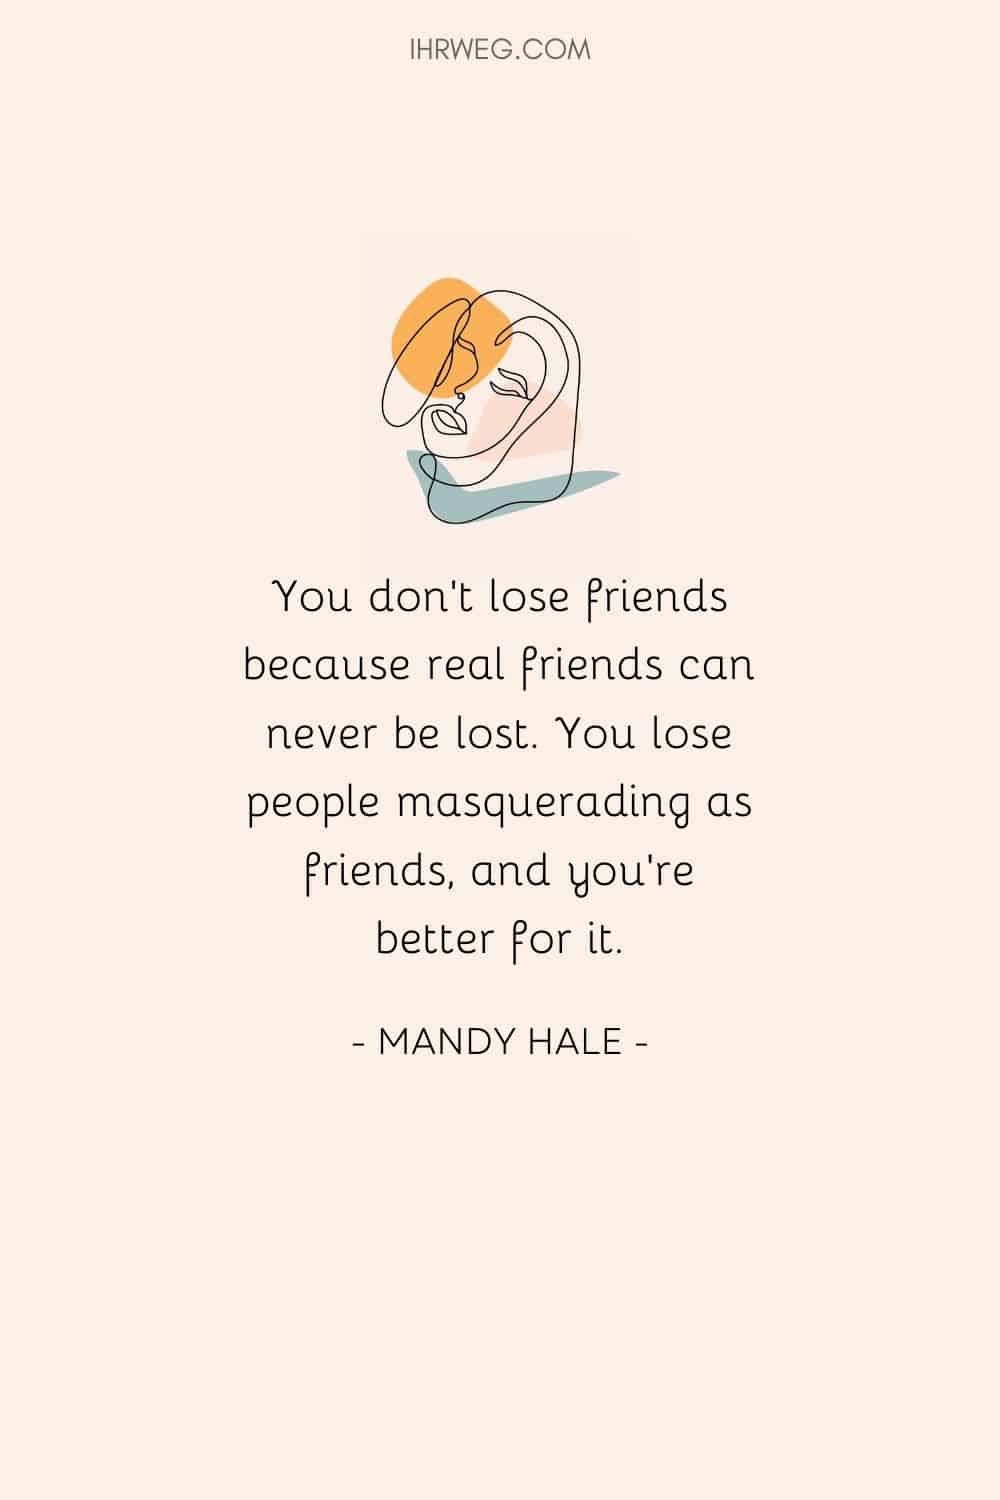 You don’t lose friends because real friends can never be lost